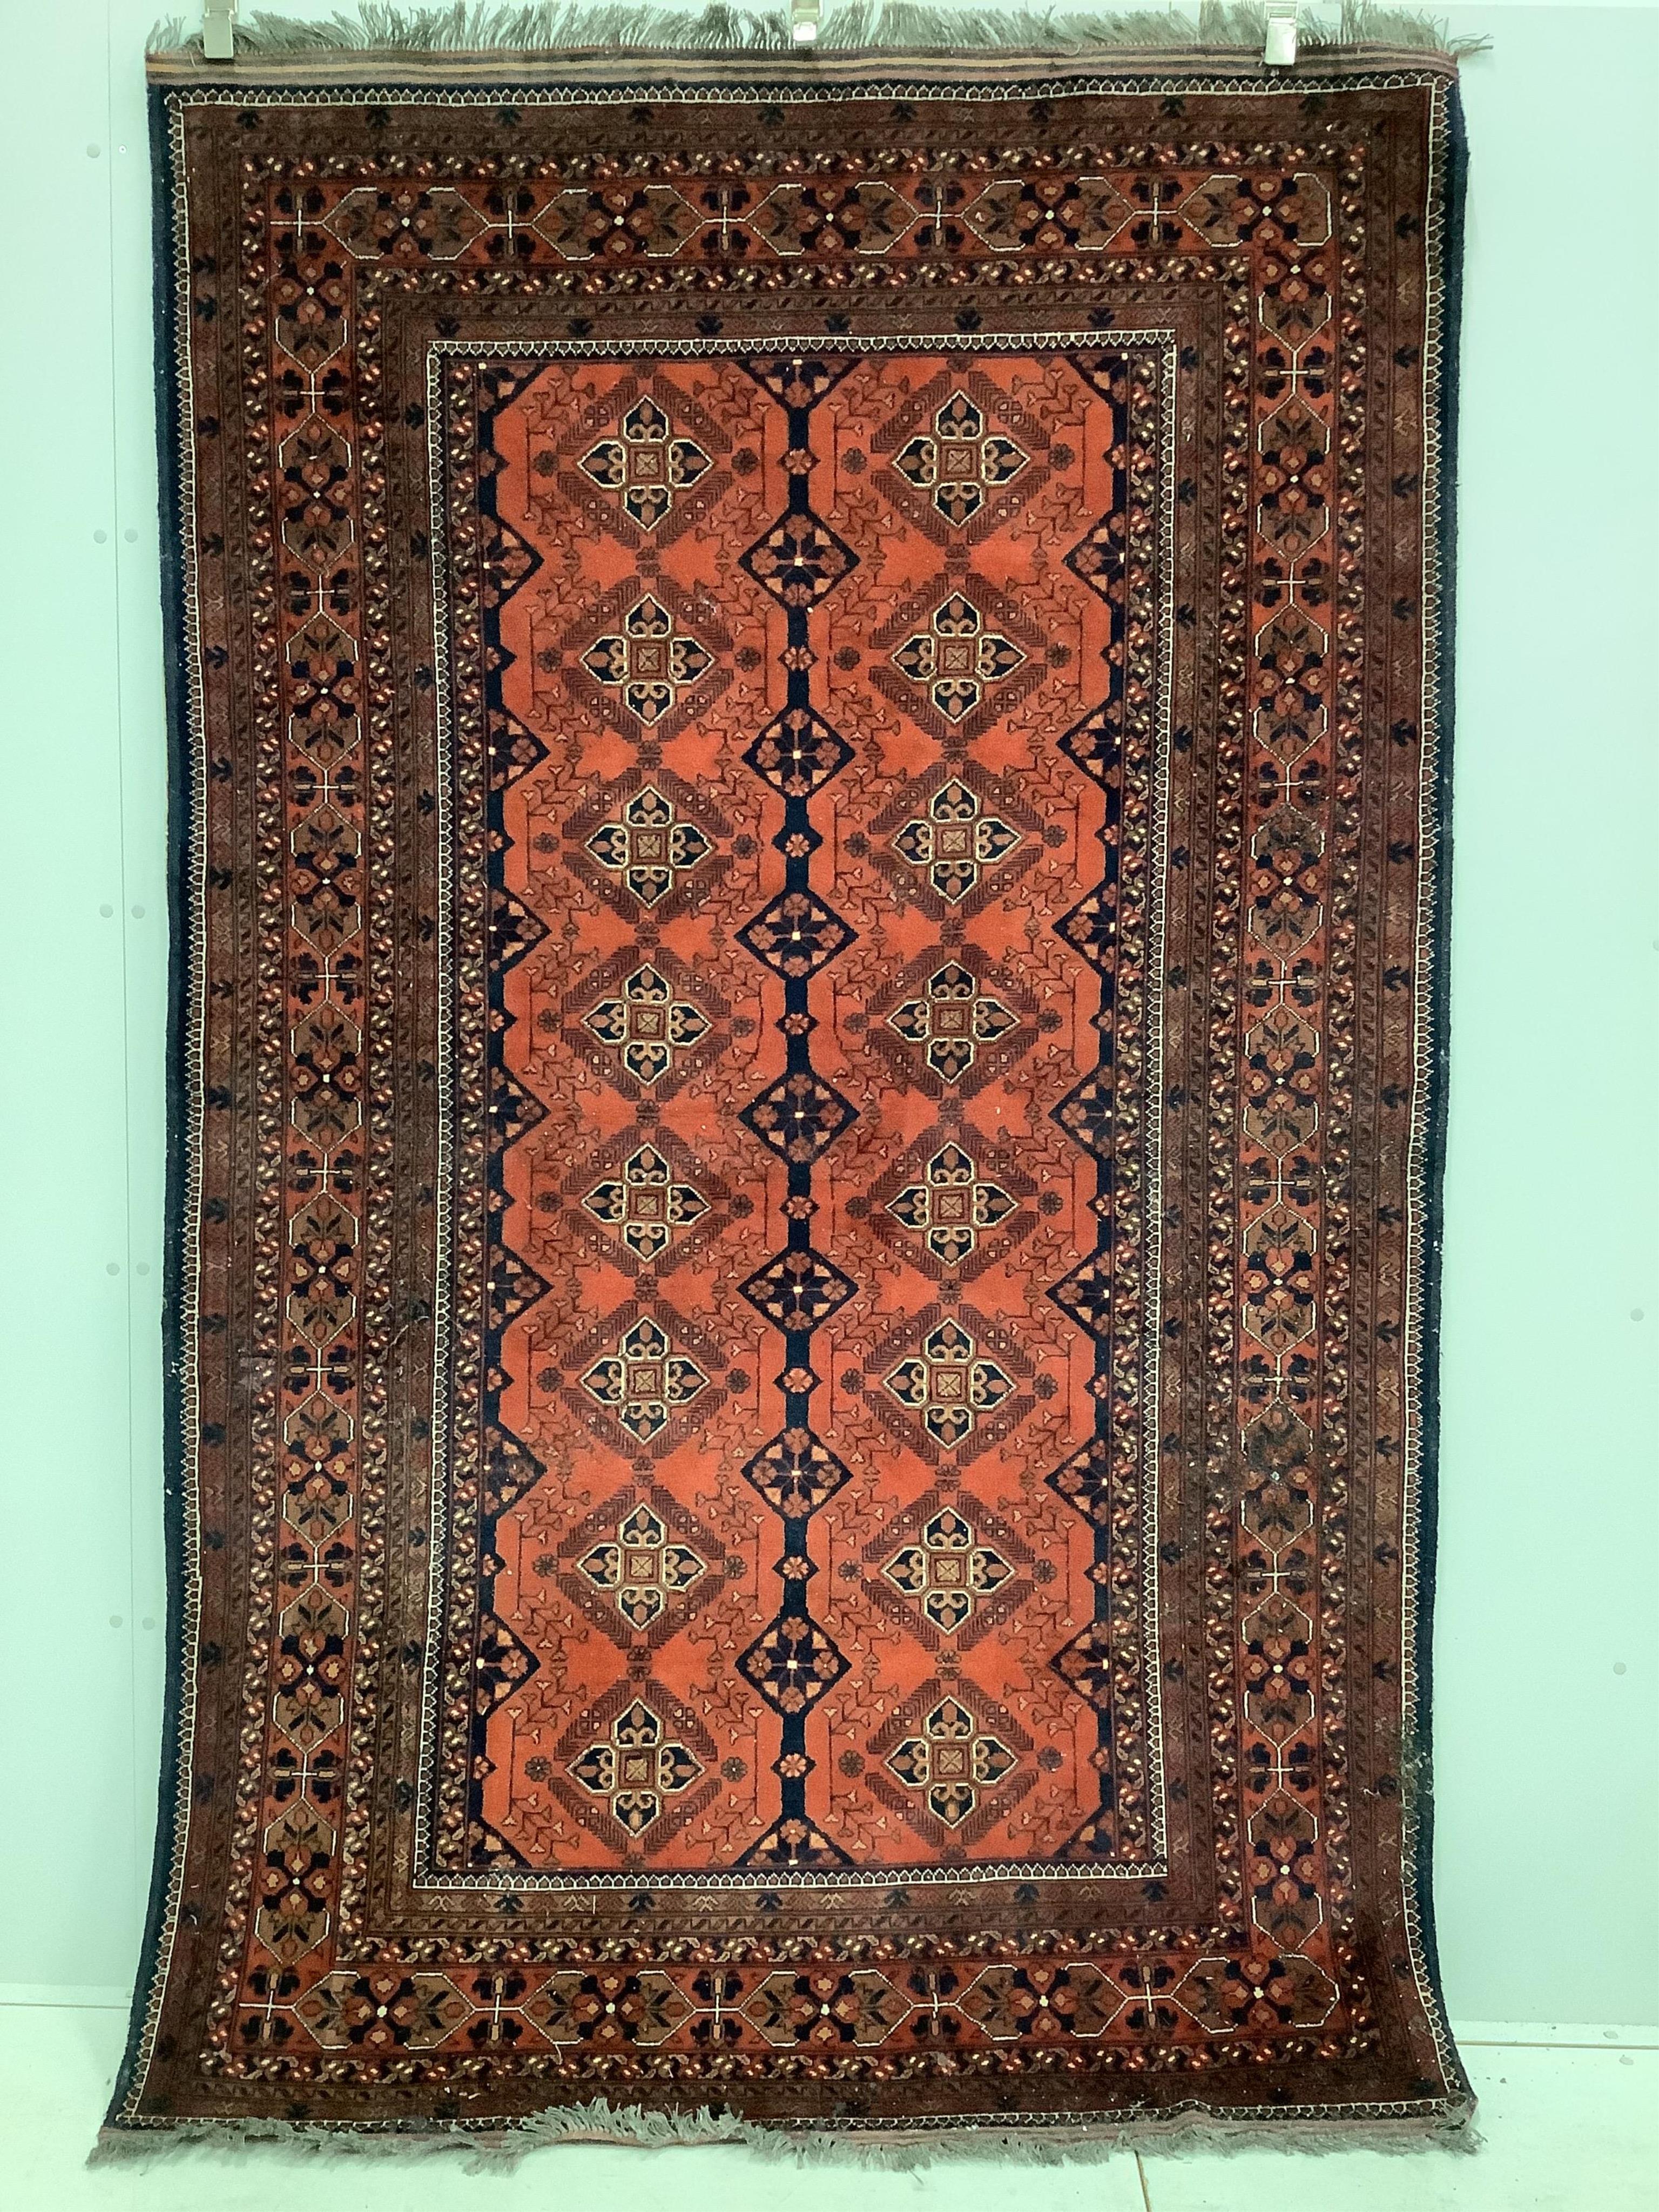 A ‘Khan Mohamadi’ Afghan red ground small carpet, woven with rows of lozenge devices, 240 x 152cm